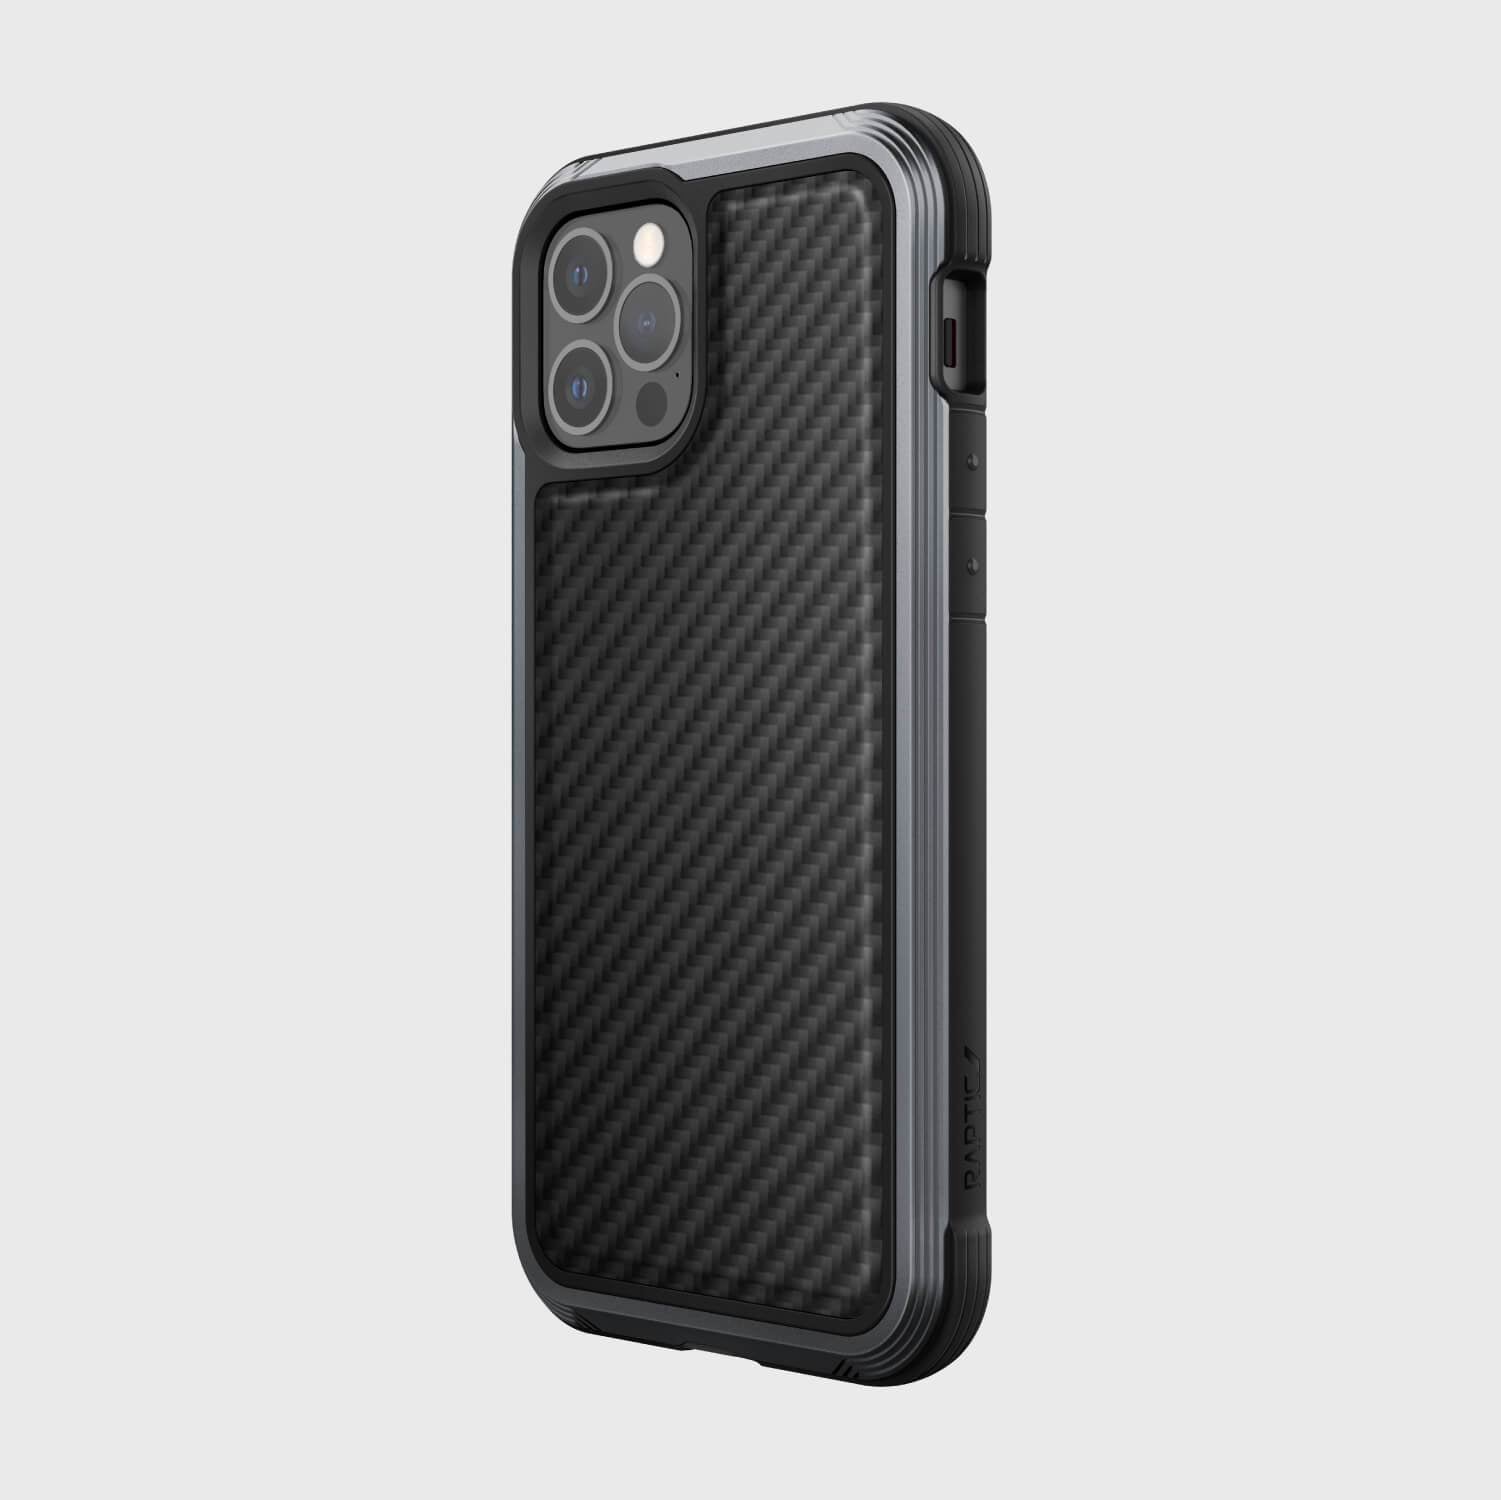 Showing an iPhone 12 Pro Max in a Black carbon Raptic Lux case